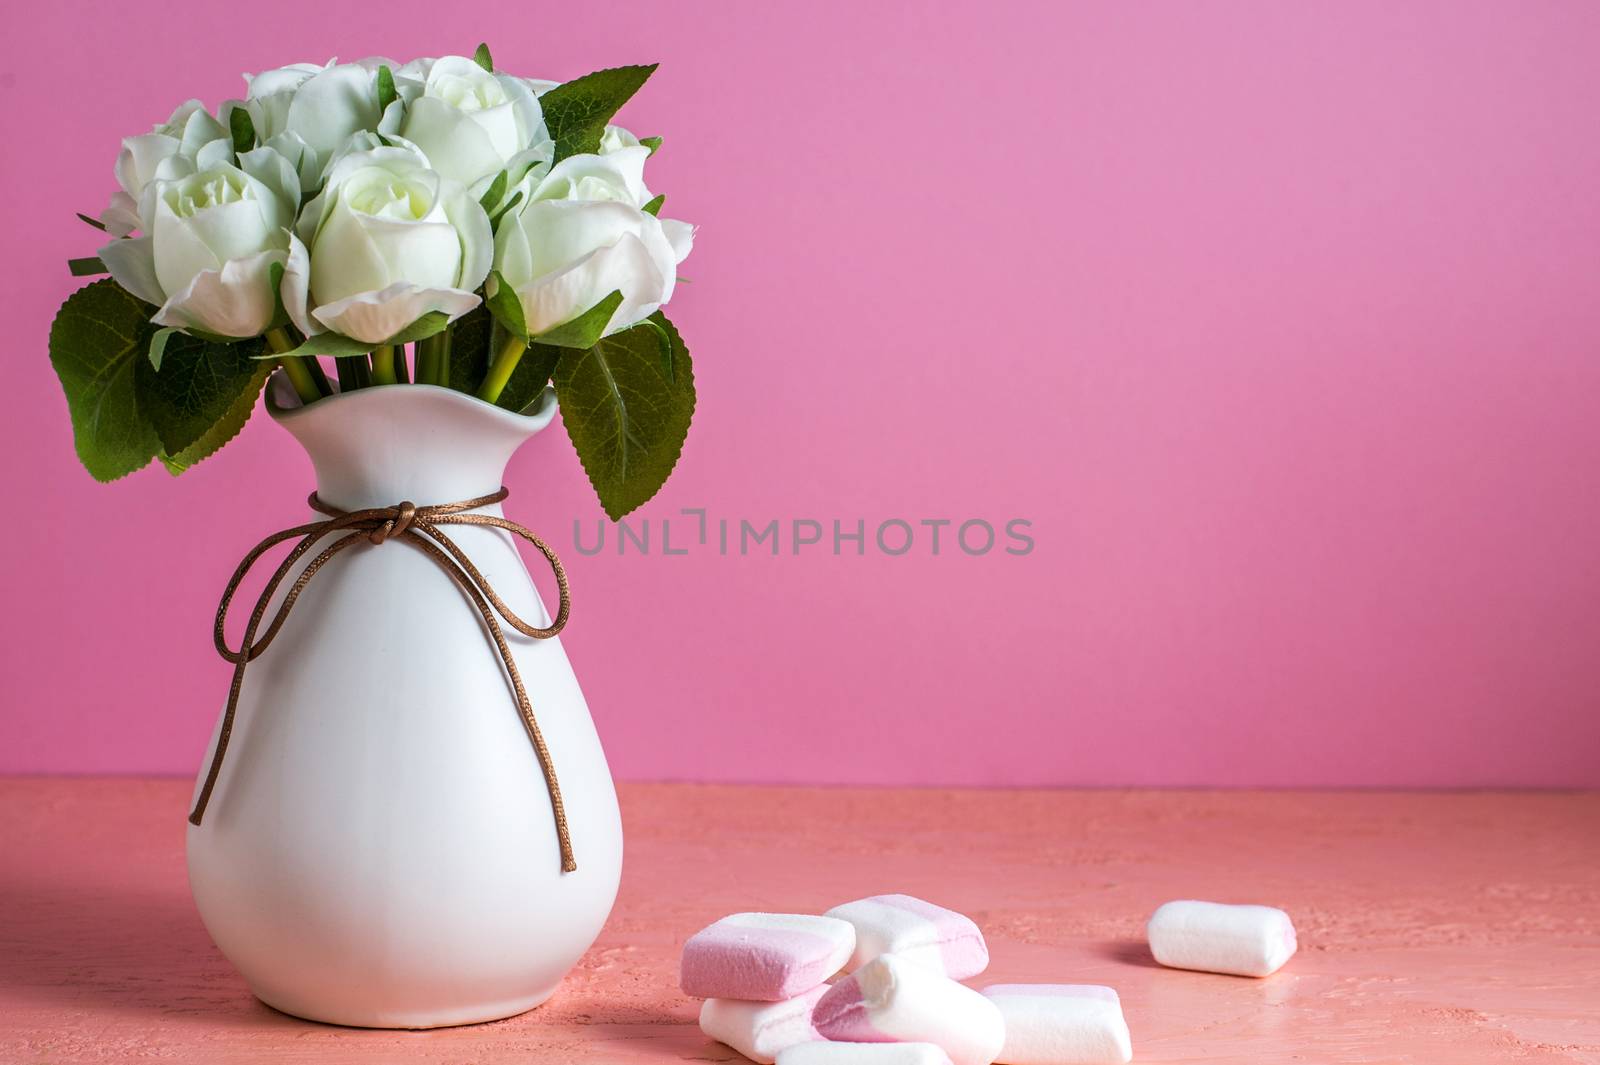 Copyspace with colorful mini marshmallows on a table next to white roses on a pink background